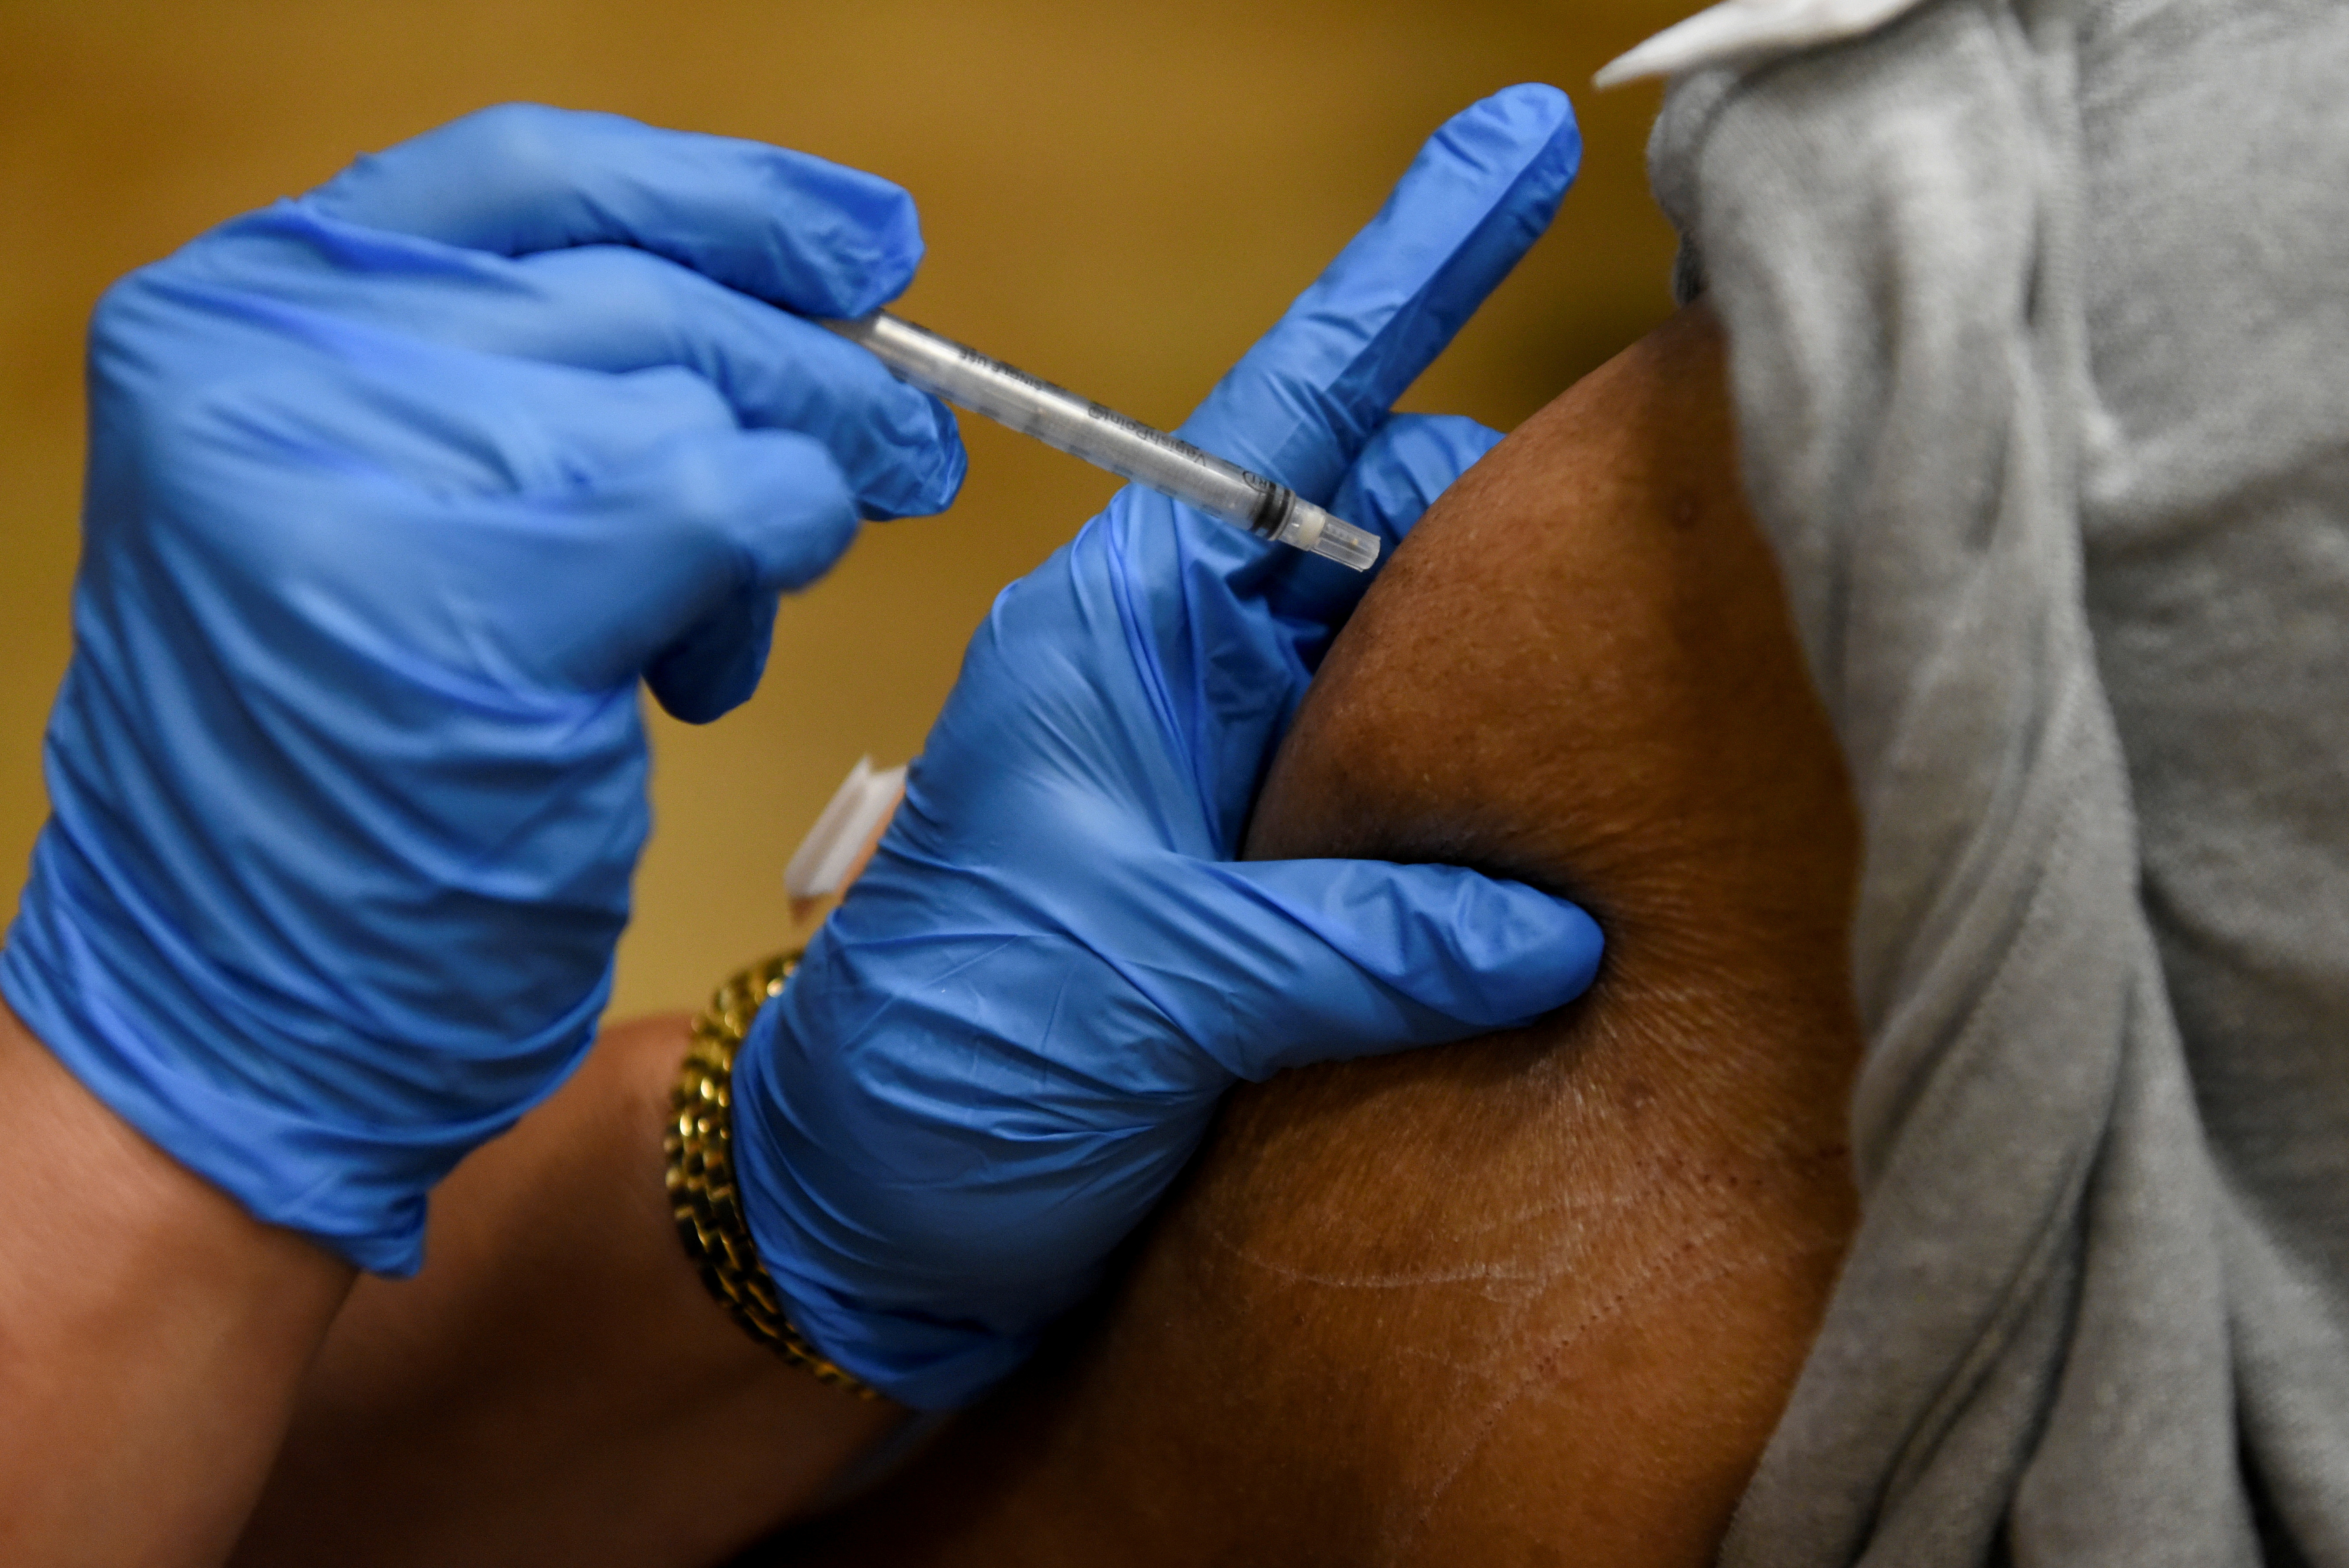 www.brookings.edu: Discrimination in the healthcare system is leading to vaccination hesitancy